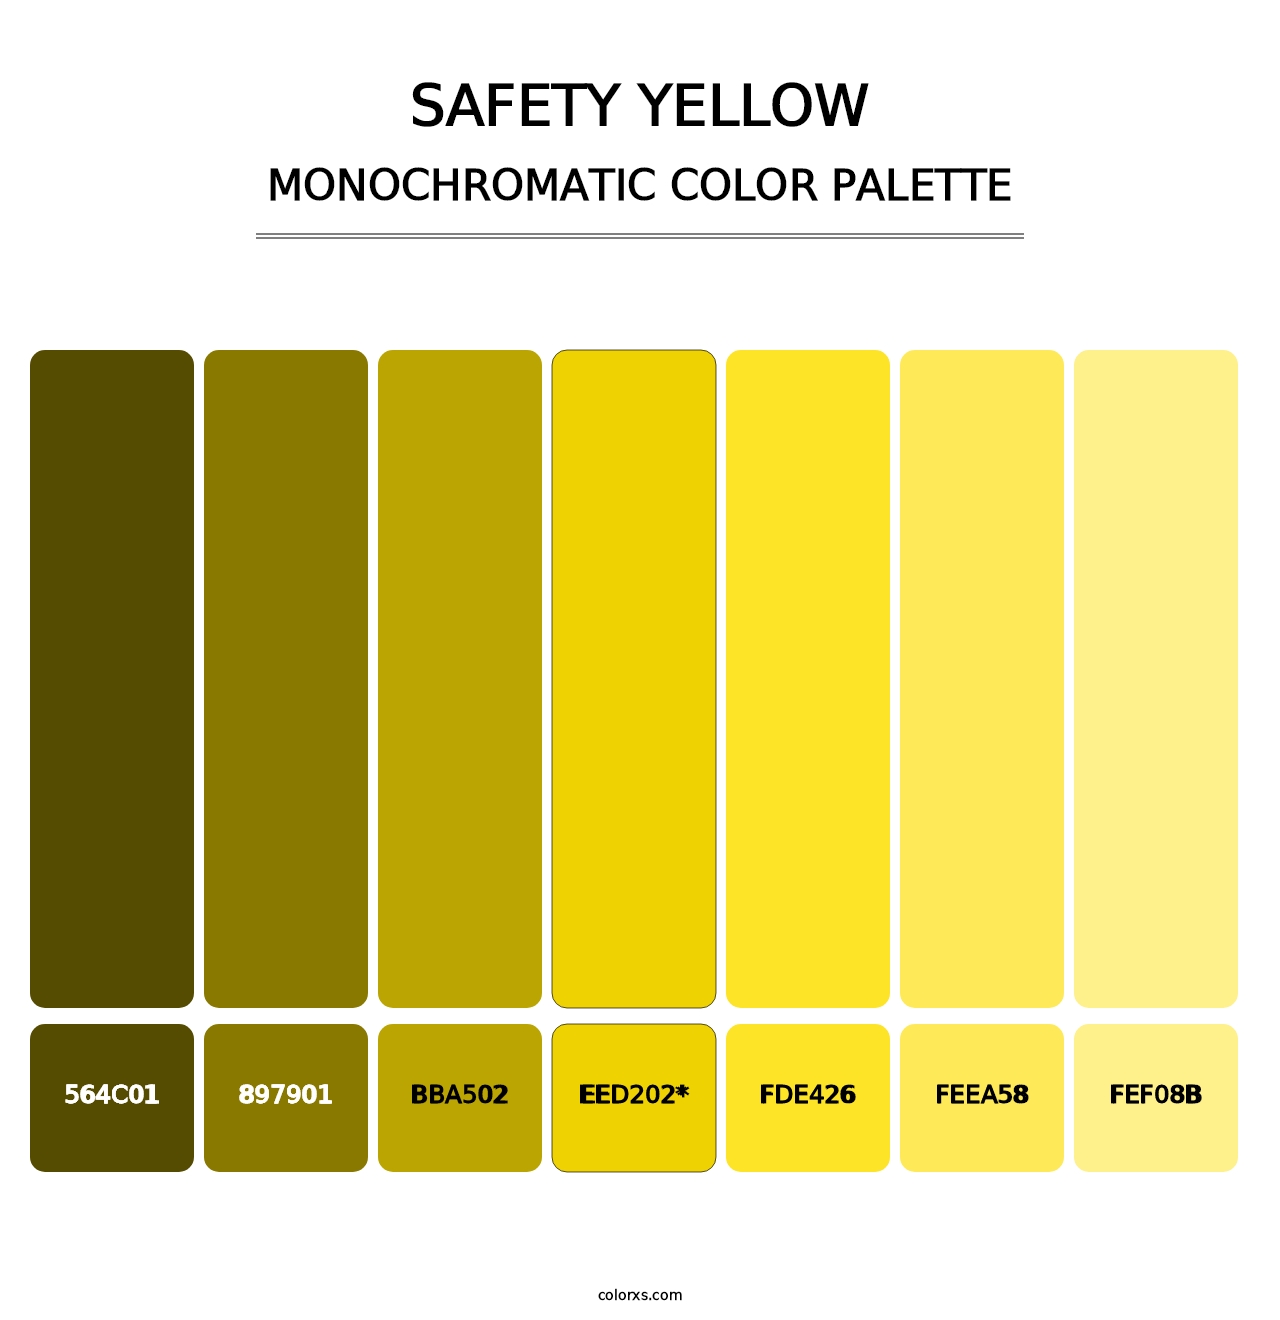 Safety Yellow - Monochromatic Color Palette